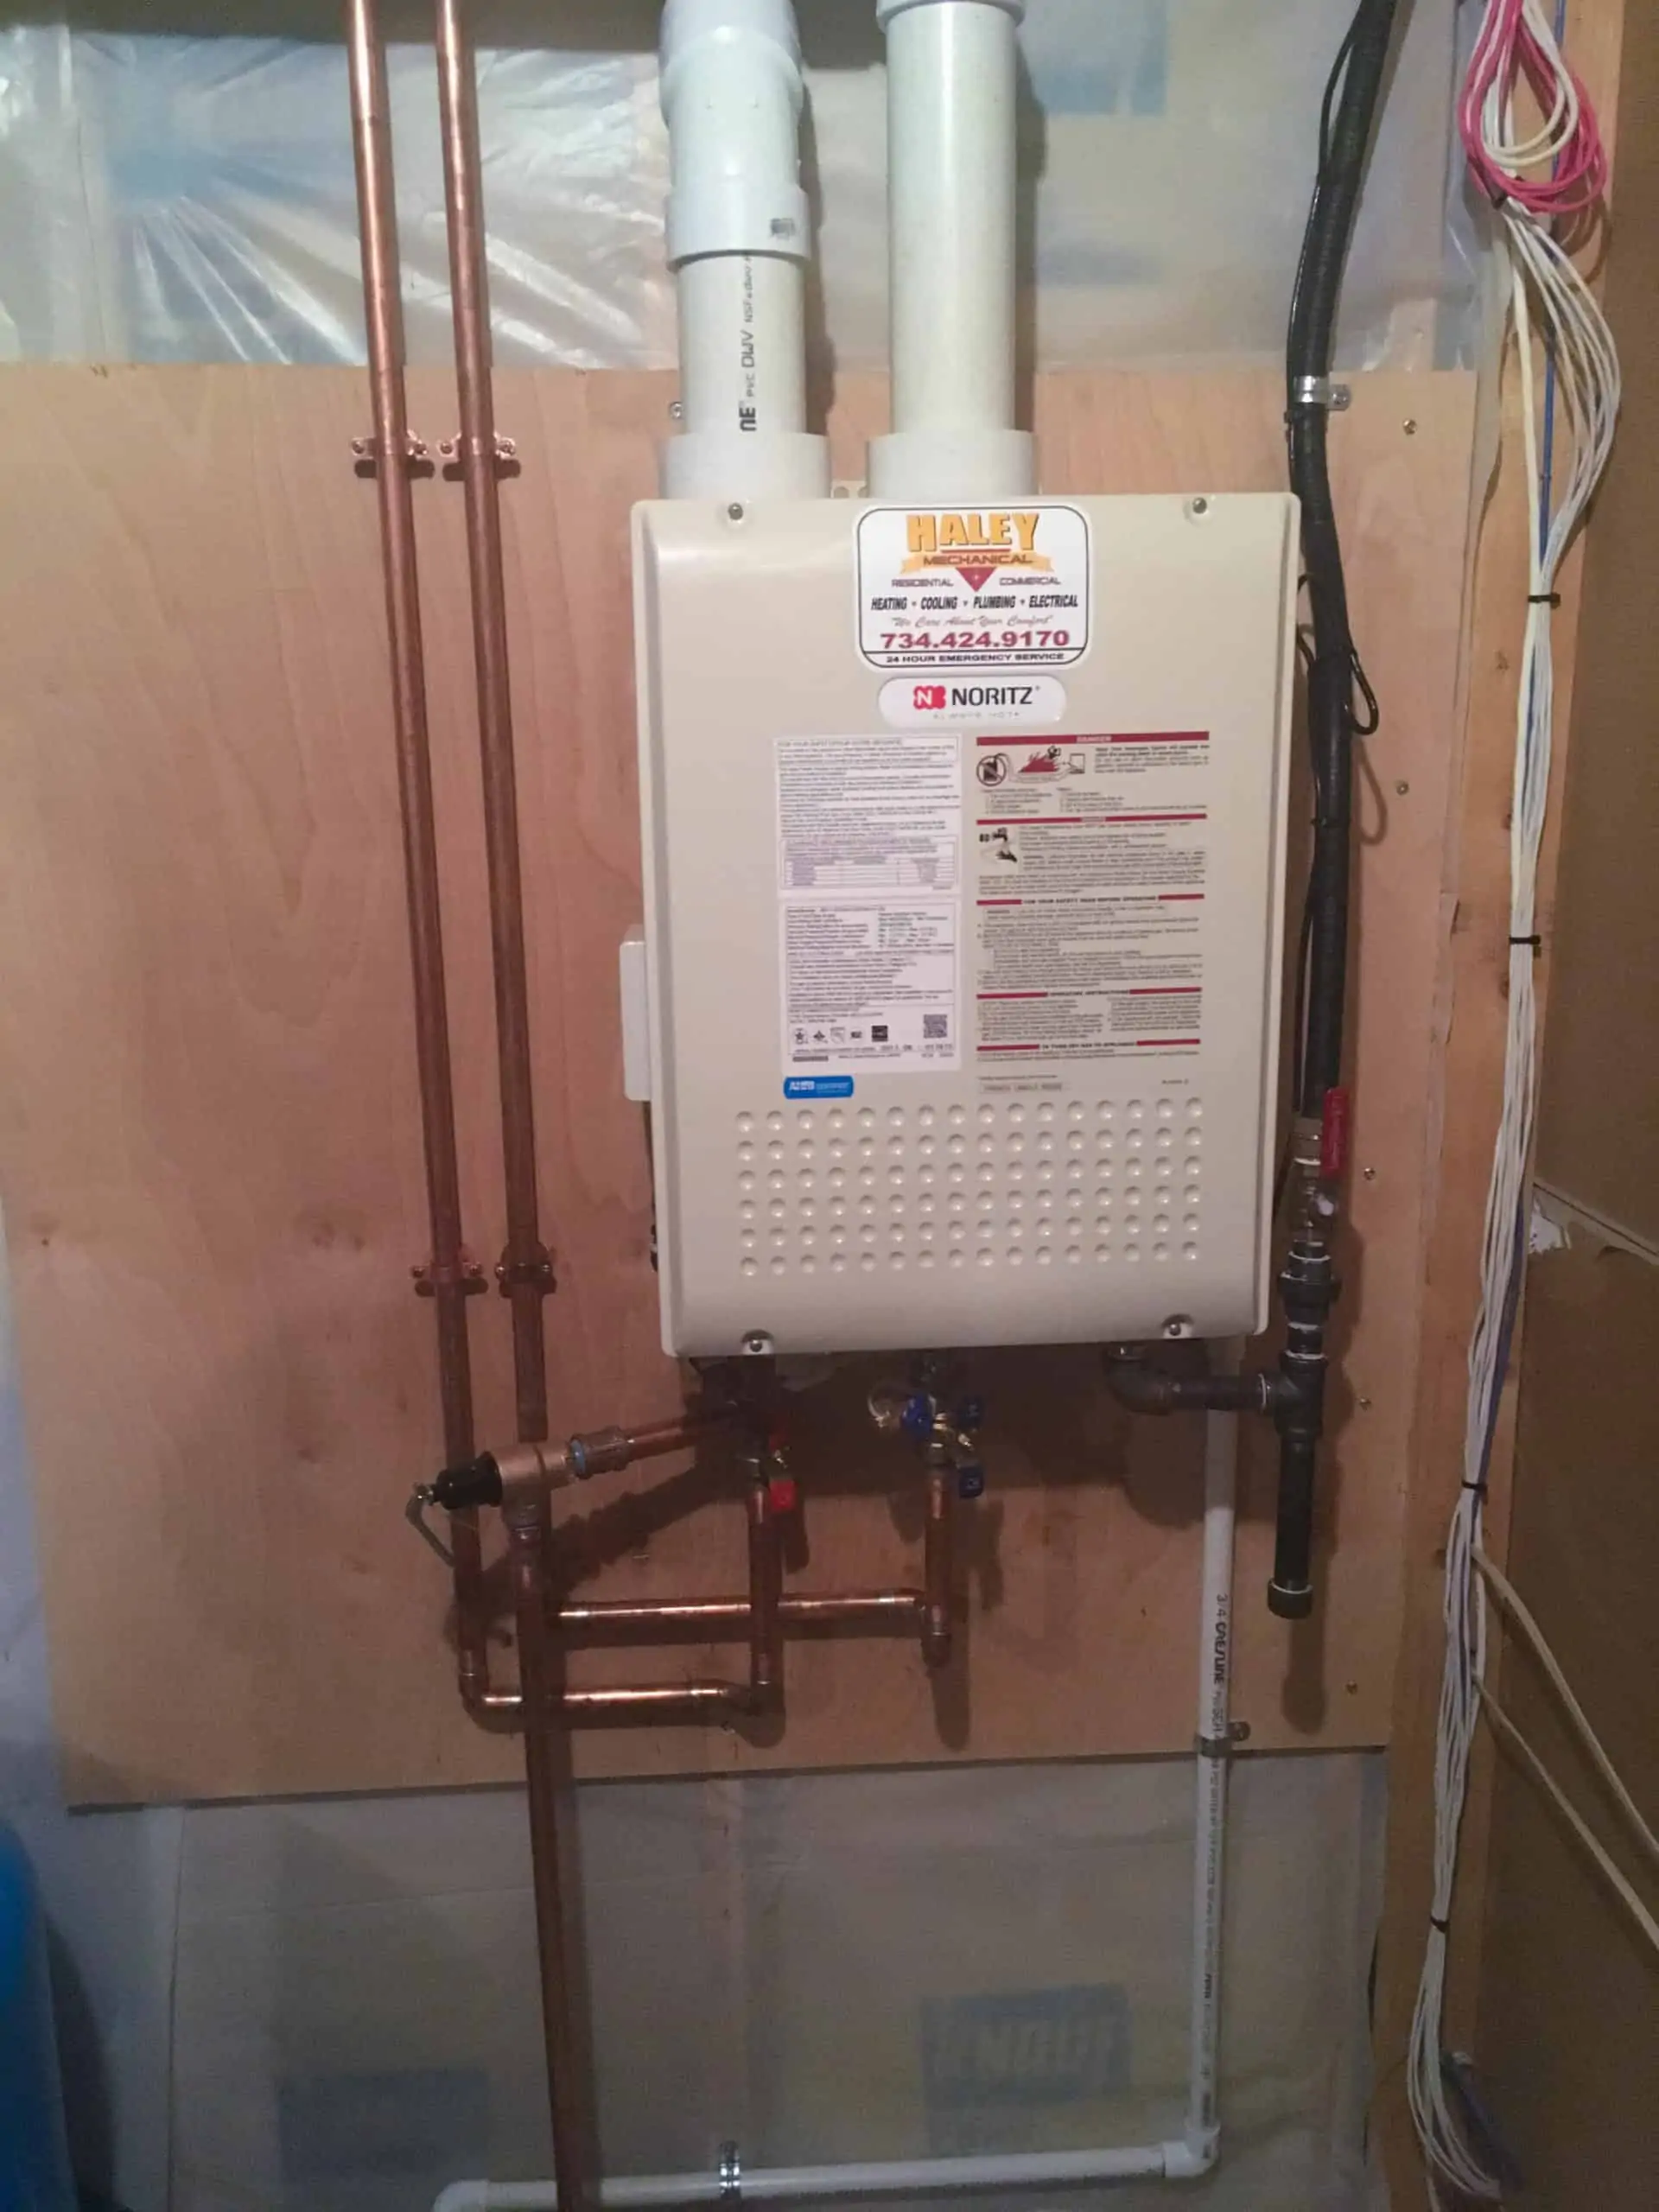 https://haleymechanical.com/wp-content/uploads/2020/10/tankless-water-heater-ann-arbor-2-of-6-scaled.webp